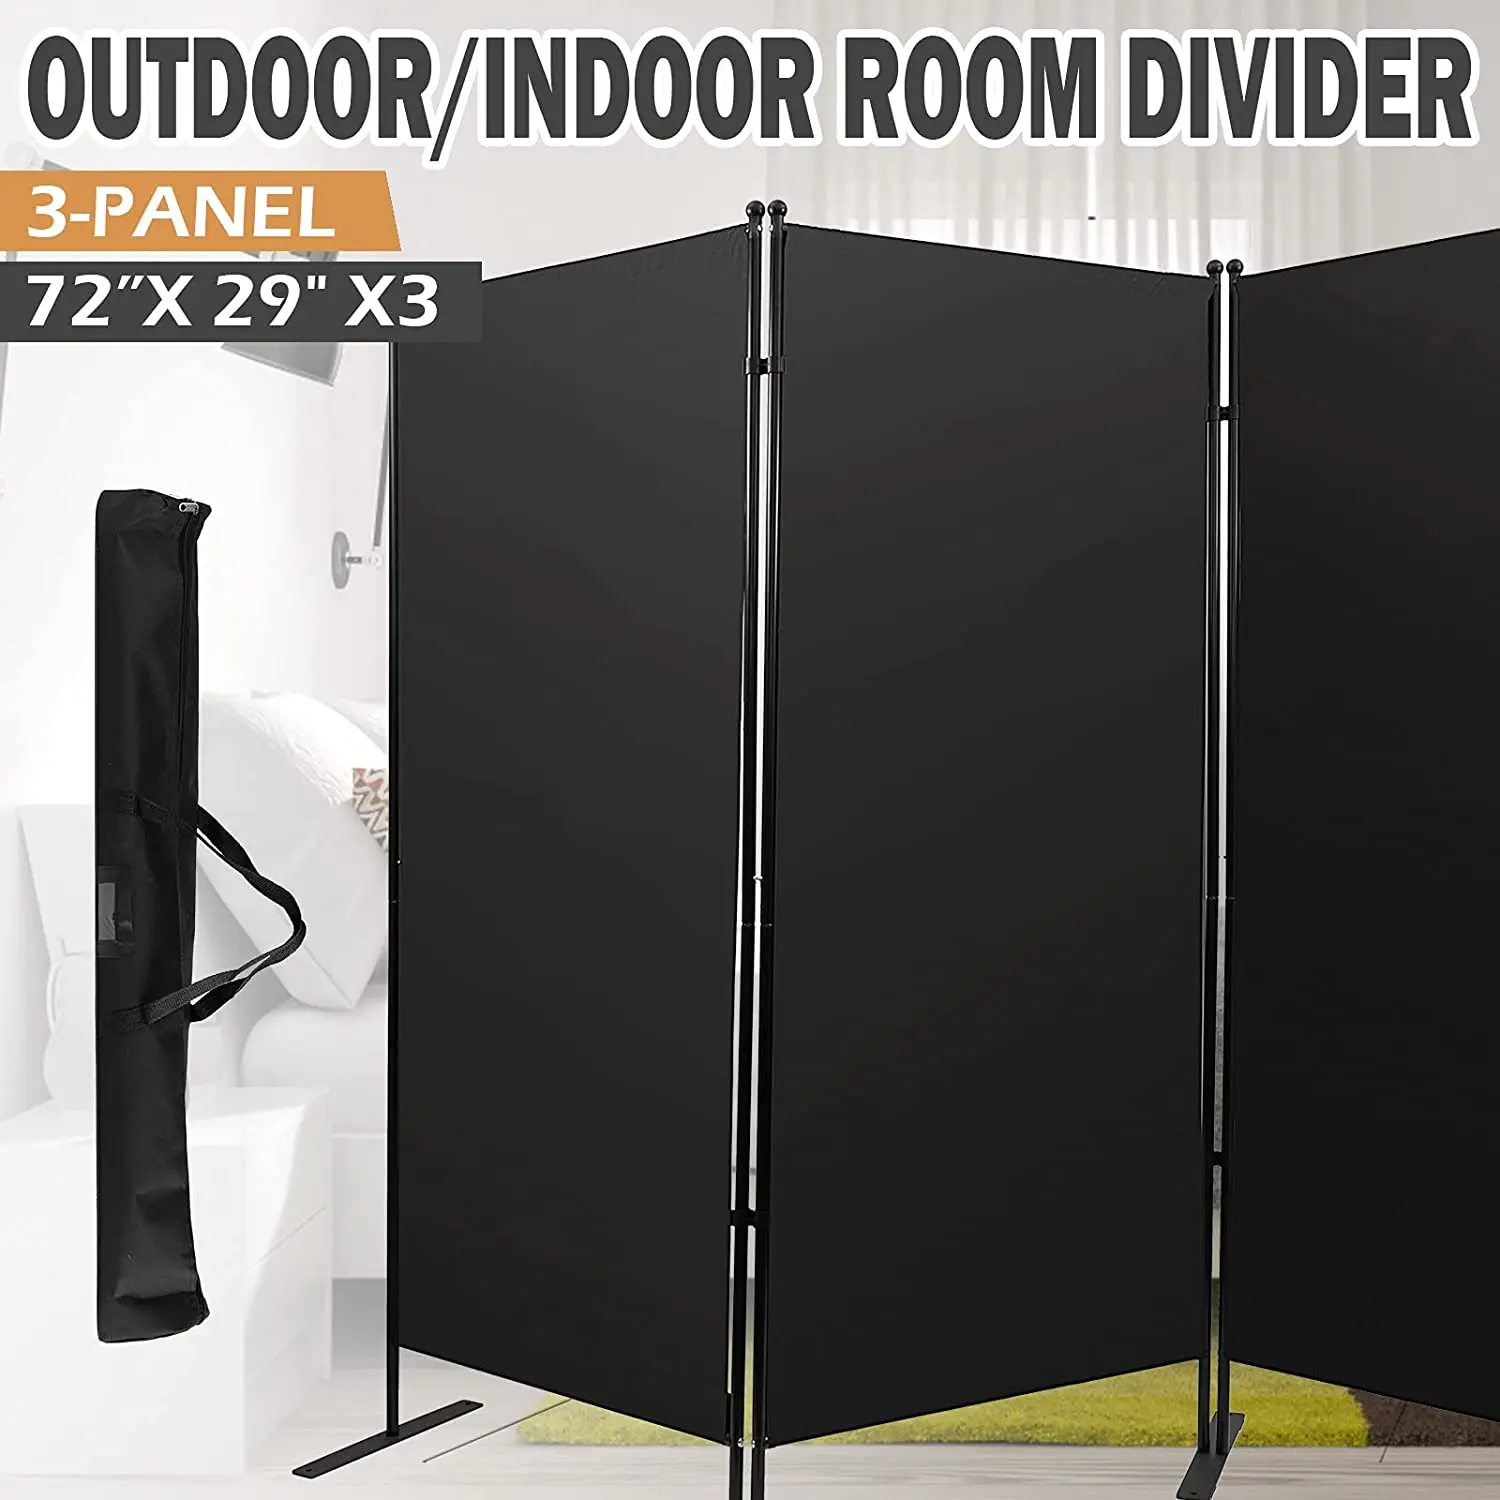 Room Divider 3 Panels Folding Partition Privacy Fence Screen Bedroom Outdoor Wind Sunshade Indoor for Home Garden Decor Office